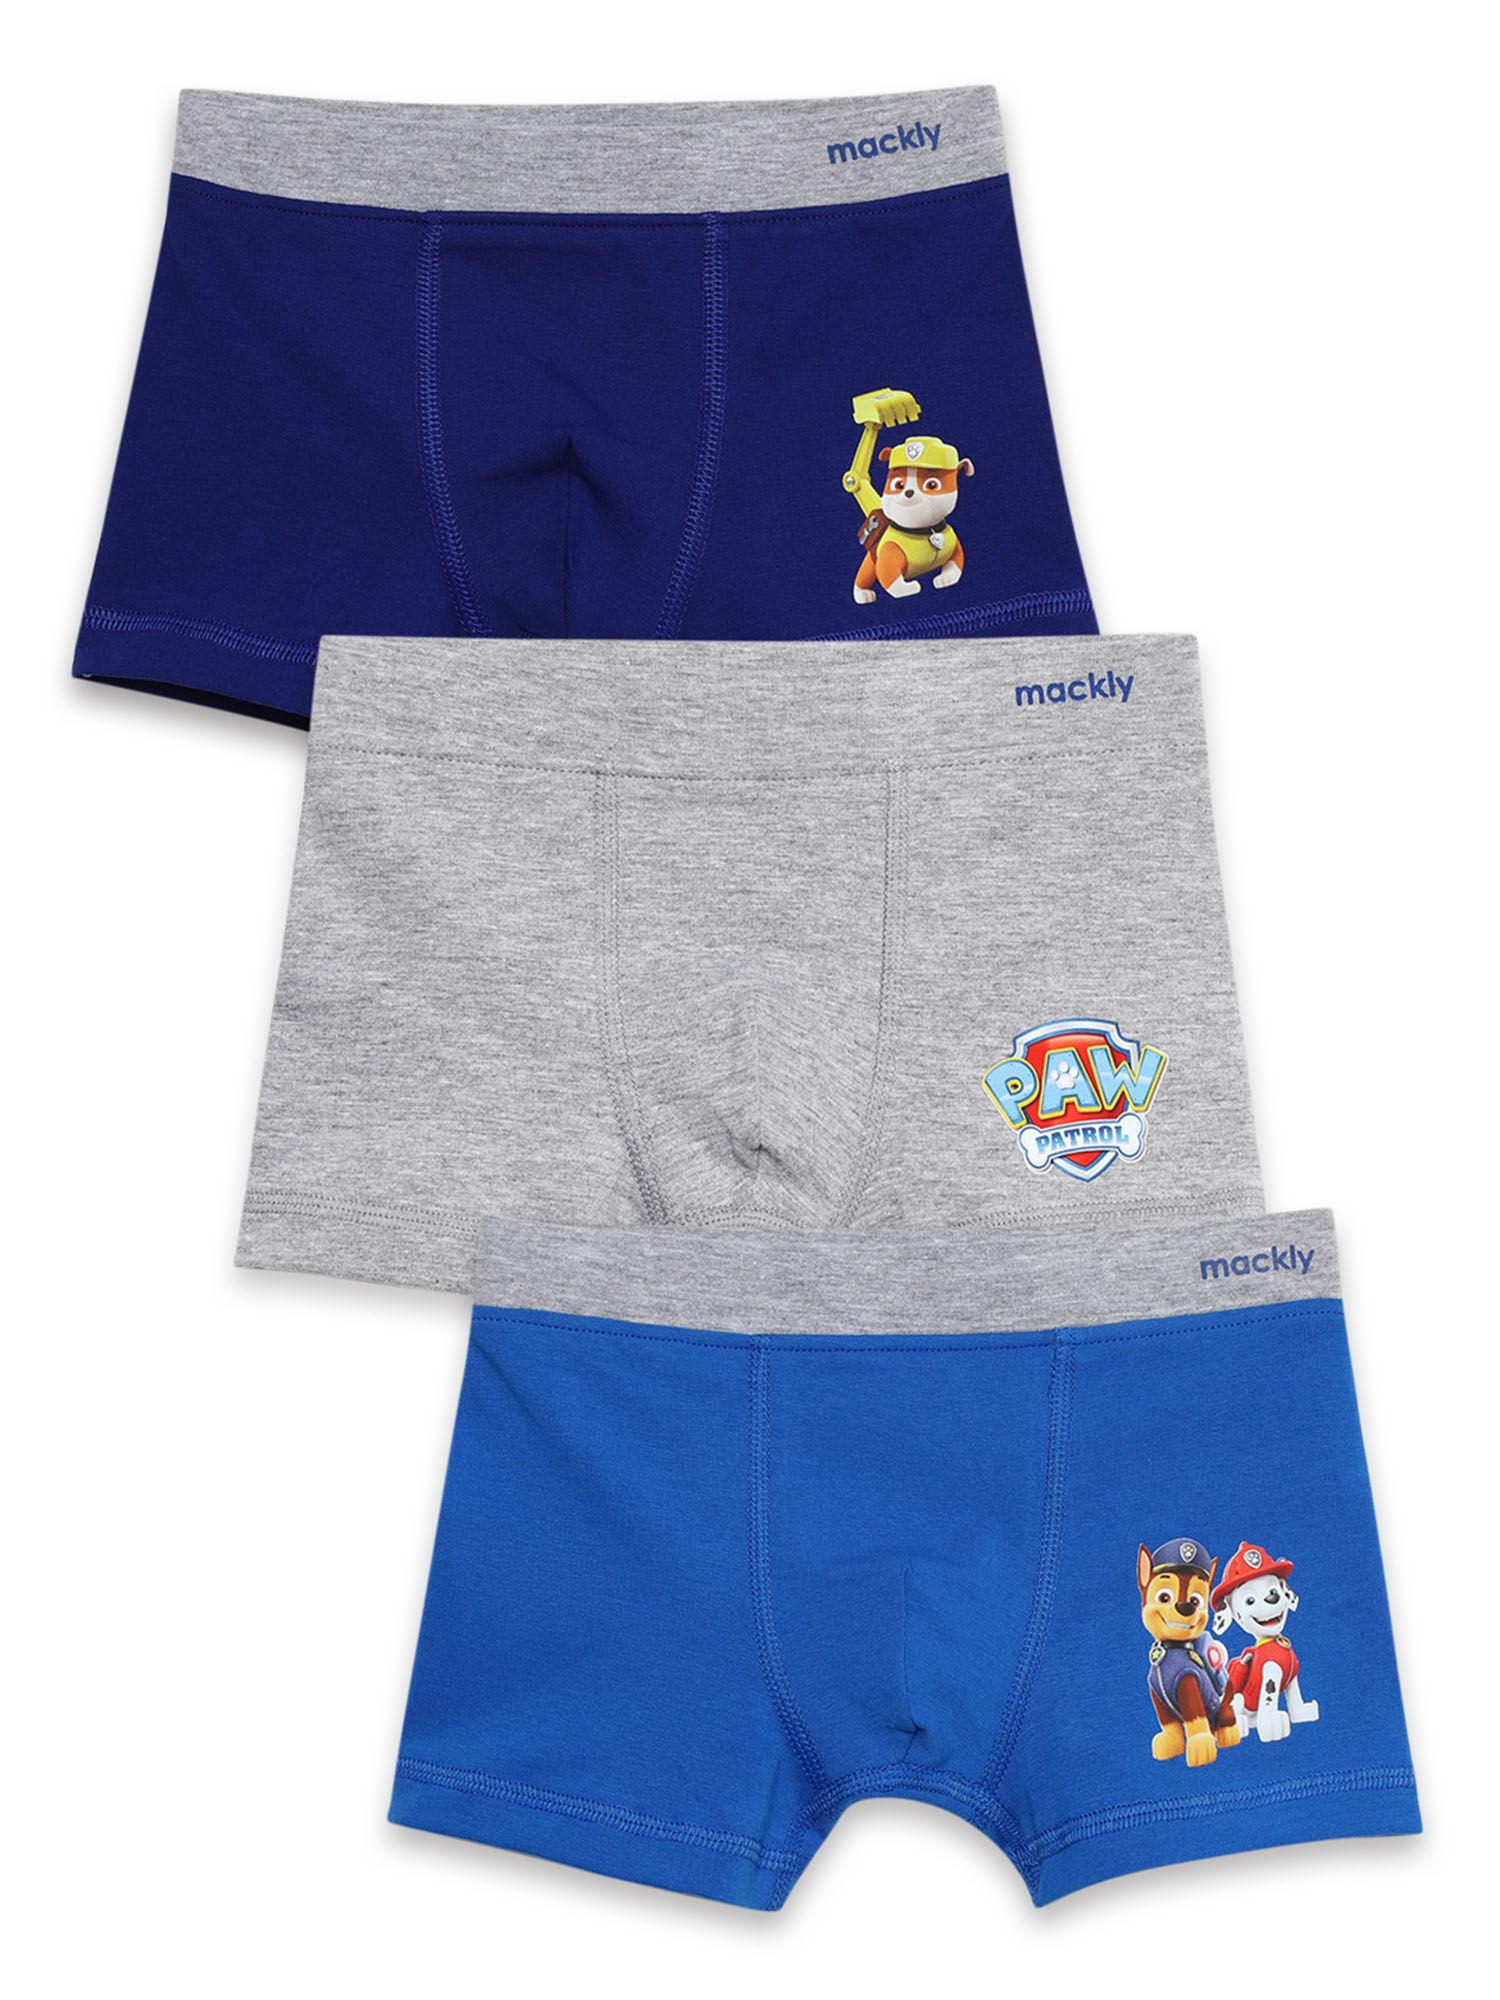 boys paw patrol boxer briefs (pack of 3)